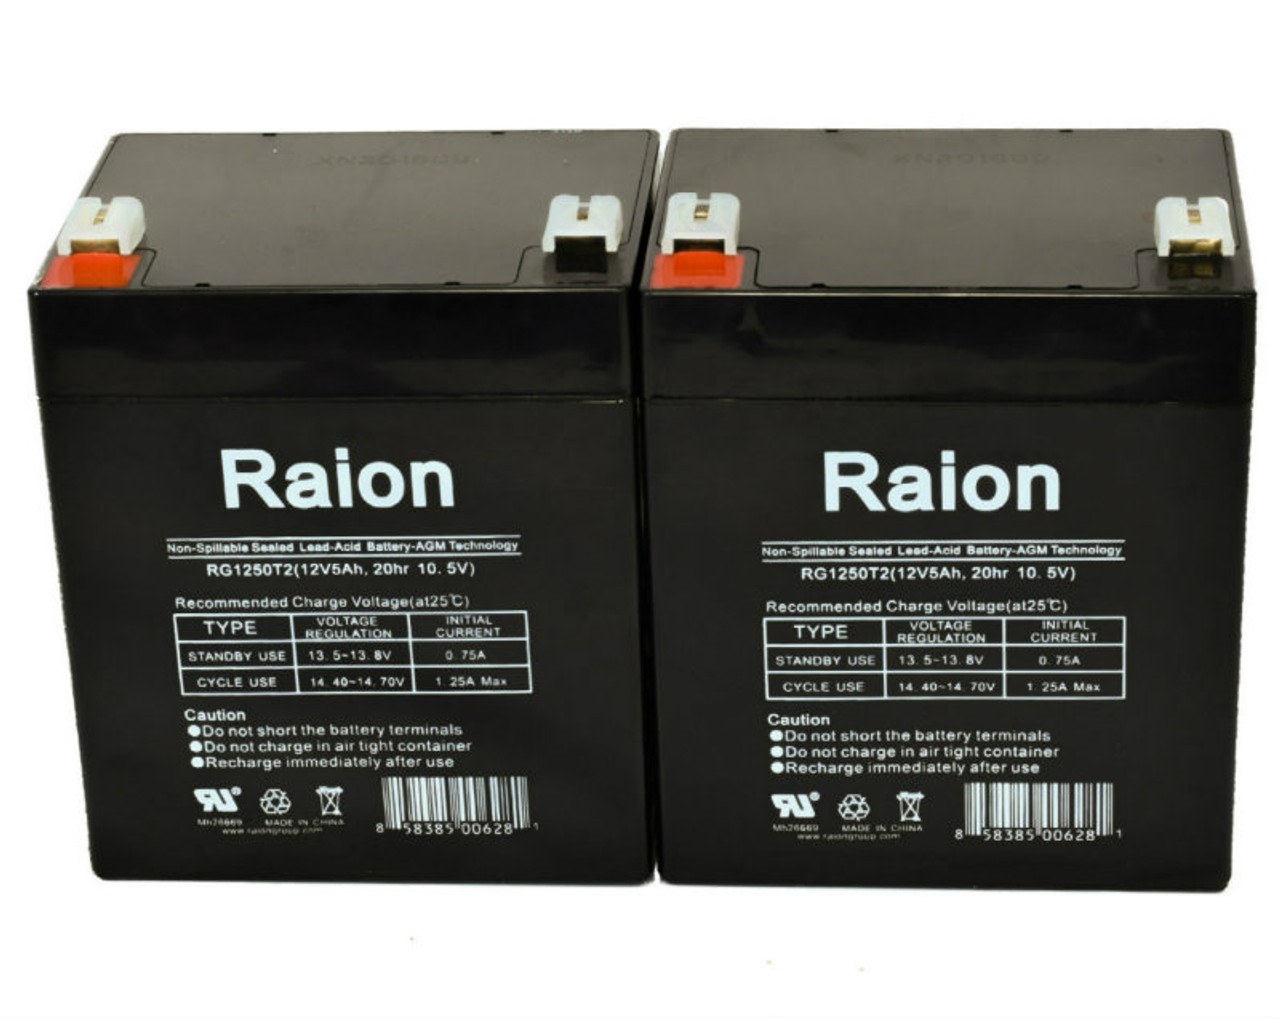 Raion Power 12V 5Ah RG1250T2 Replacement Lead Acid Battery for Weida HX12-5 - 2 Pack